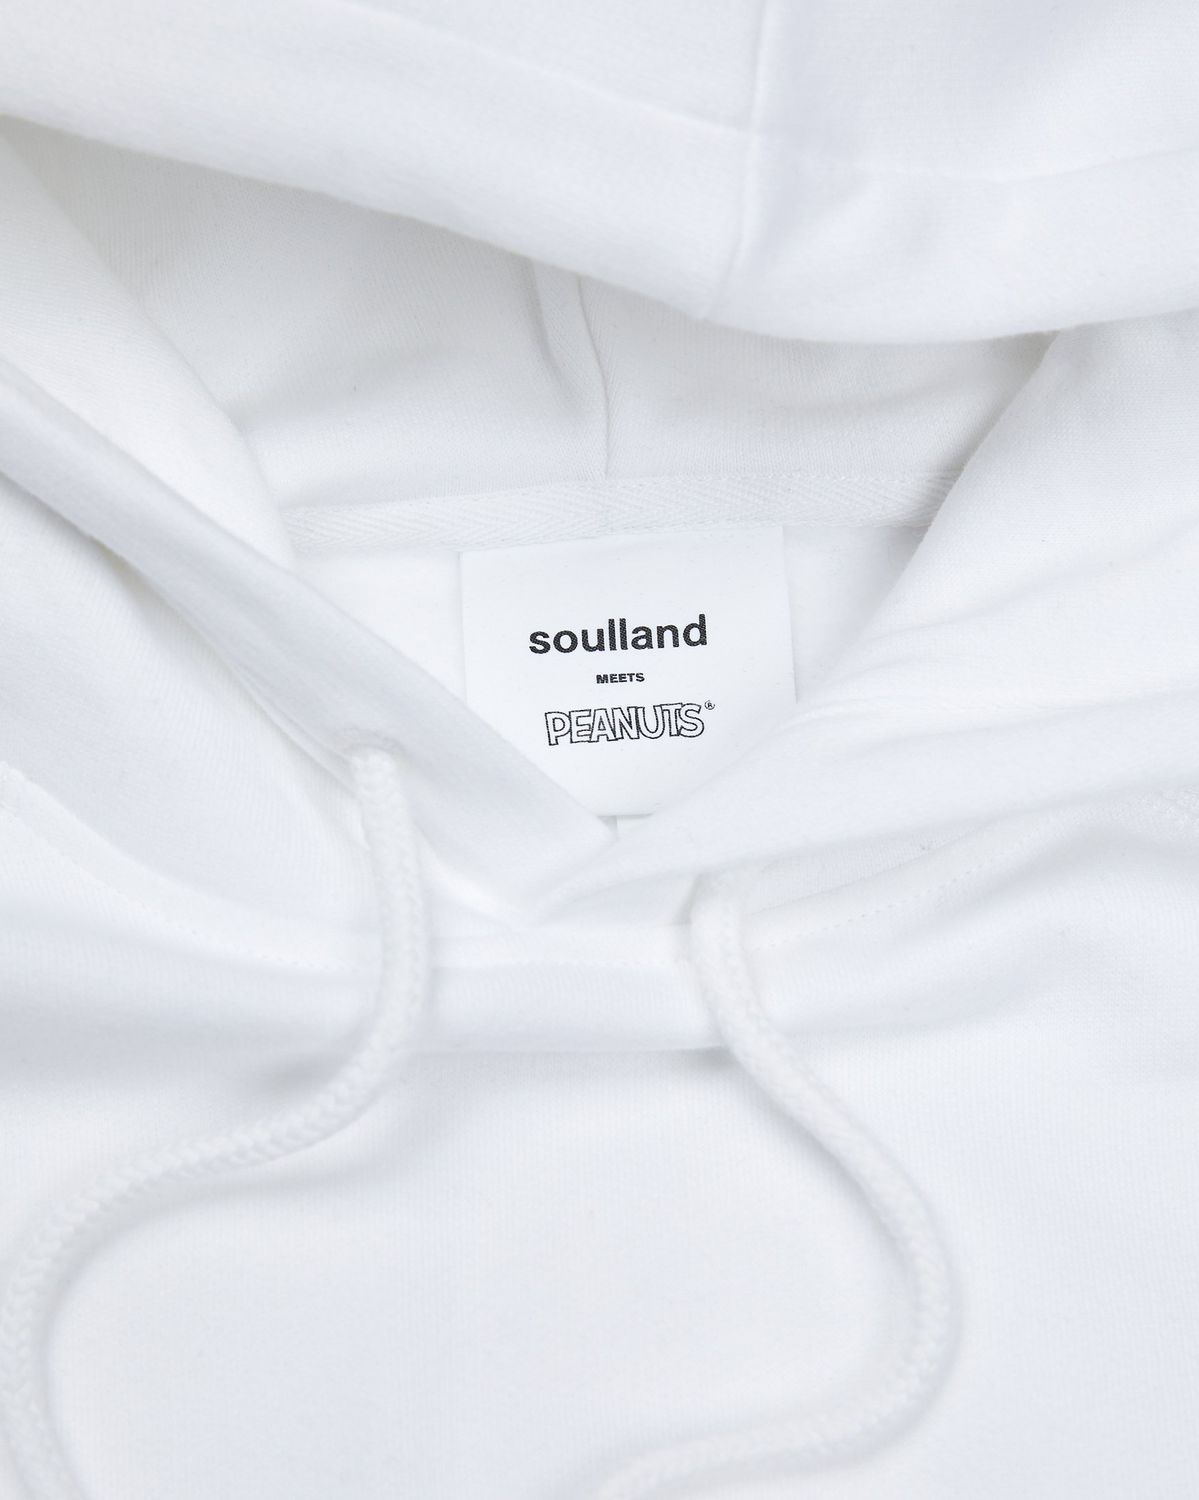 Colette Mon Amour x Soulland – Snoopy Bed White Hoodie - Hoodies - White - Image 3